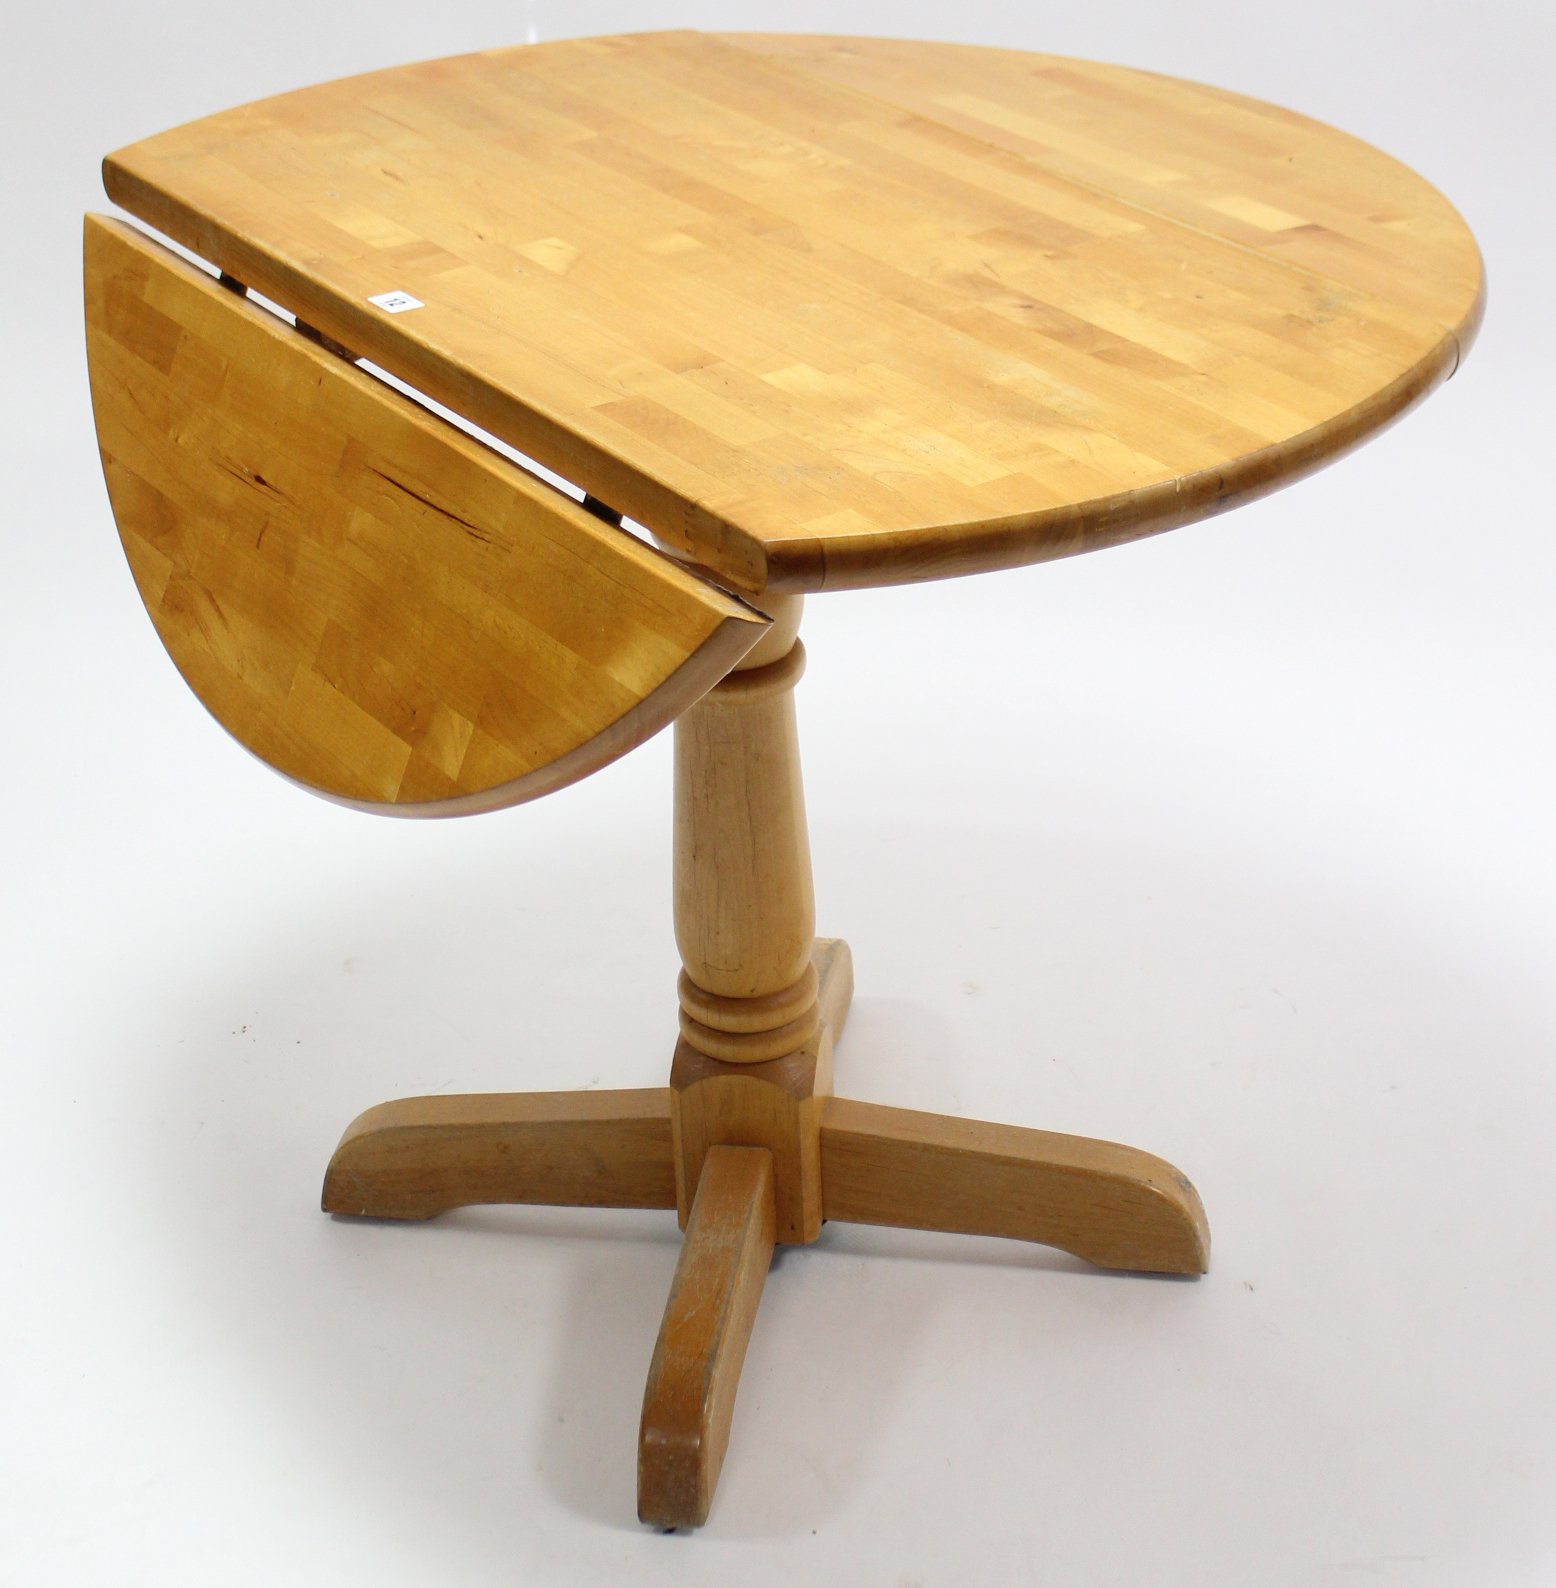 A maple-finish circular drop-leaf kitchen table on turned centre column & four splay legs, 36”